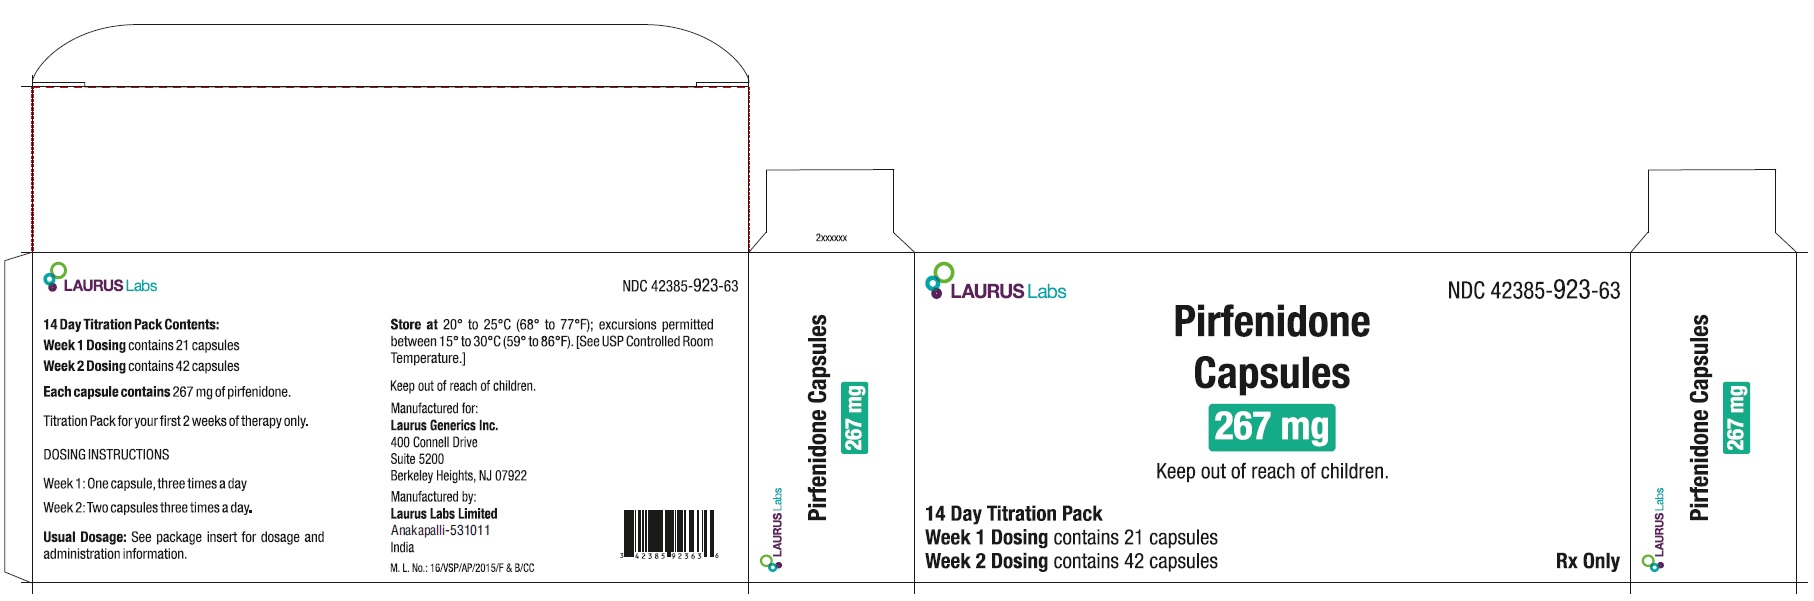 PACKAGE LABEL.PRINCIPAL DISPLAY PANEL - 14-Day Titration Pack